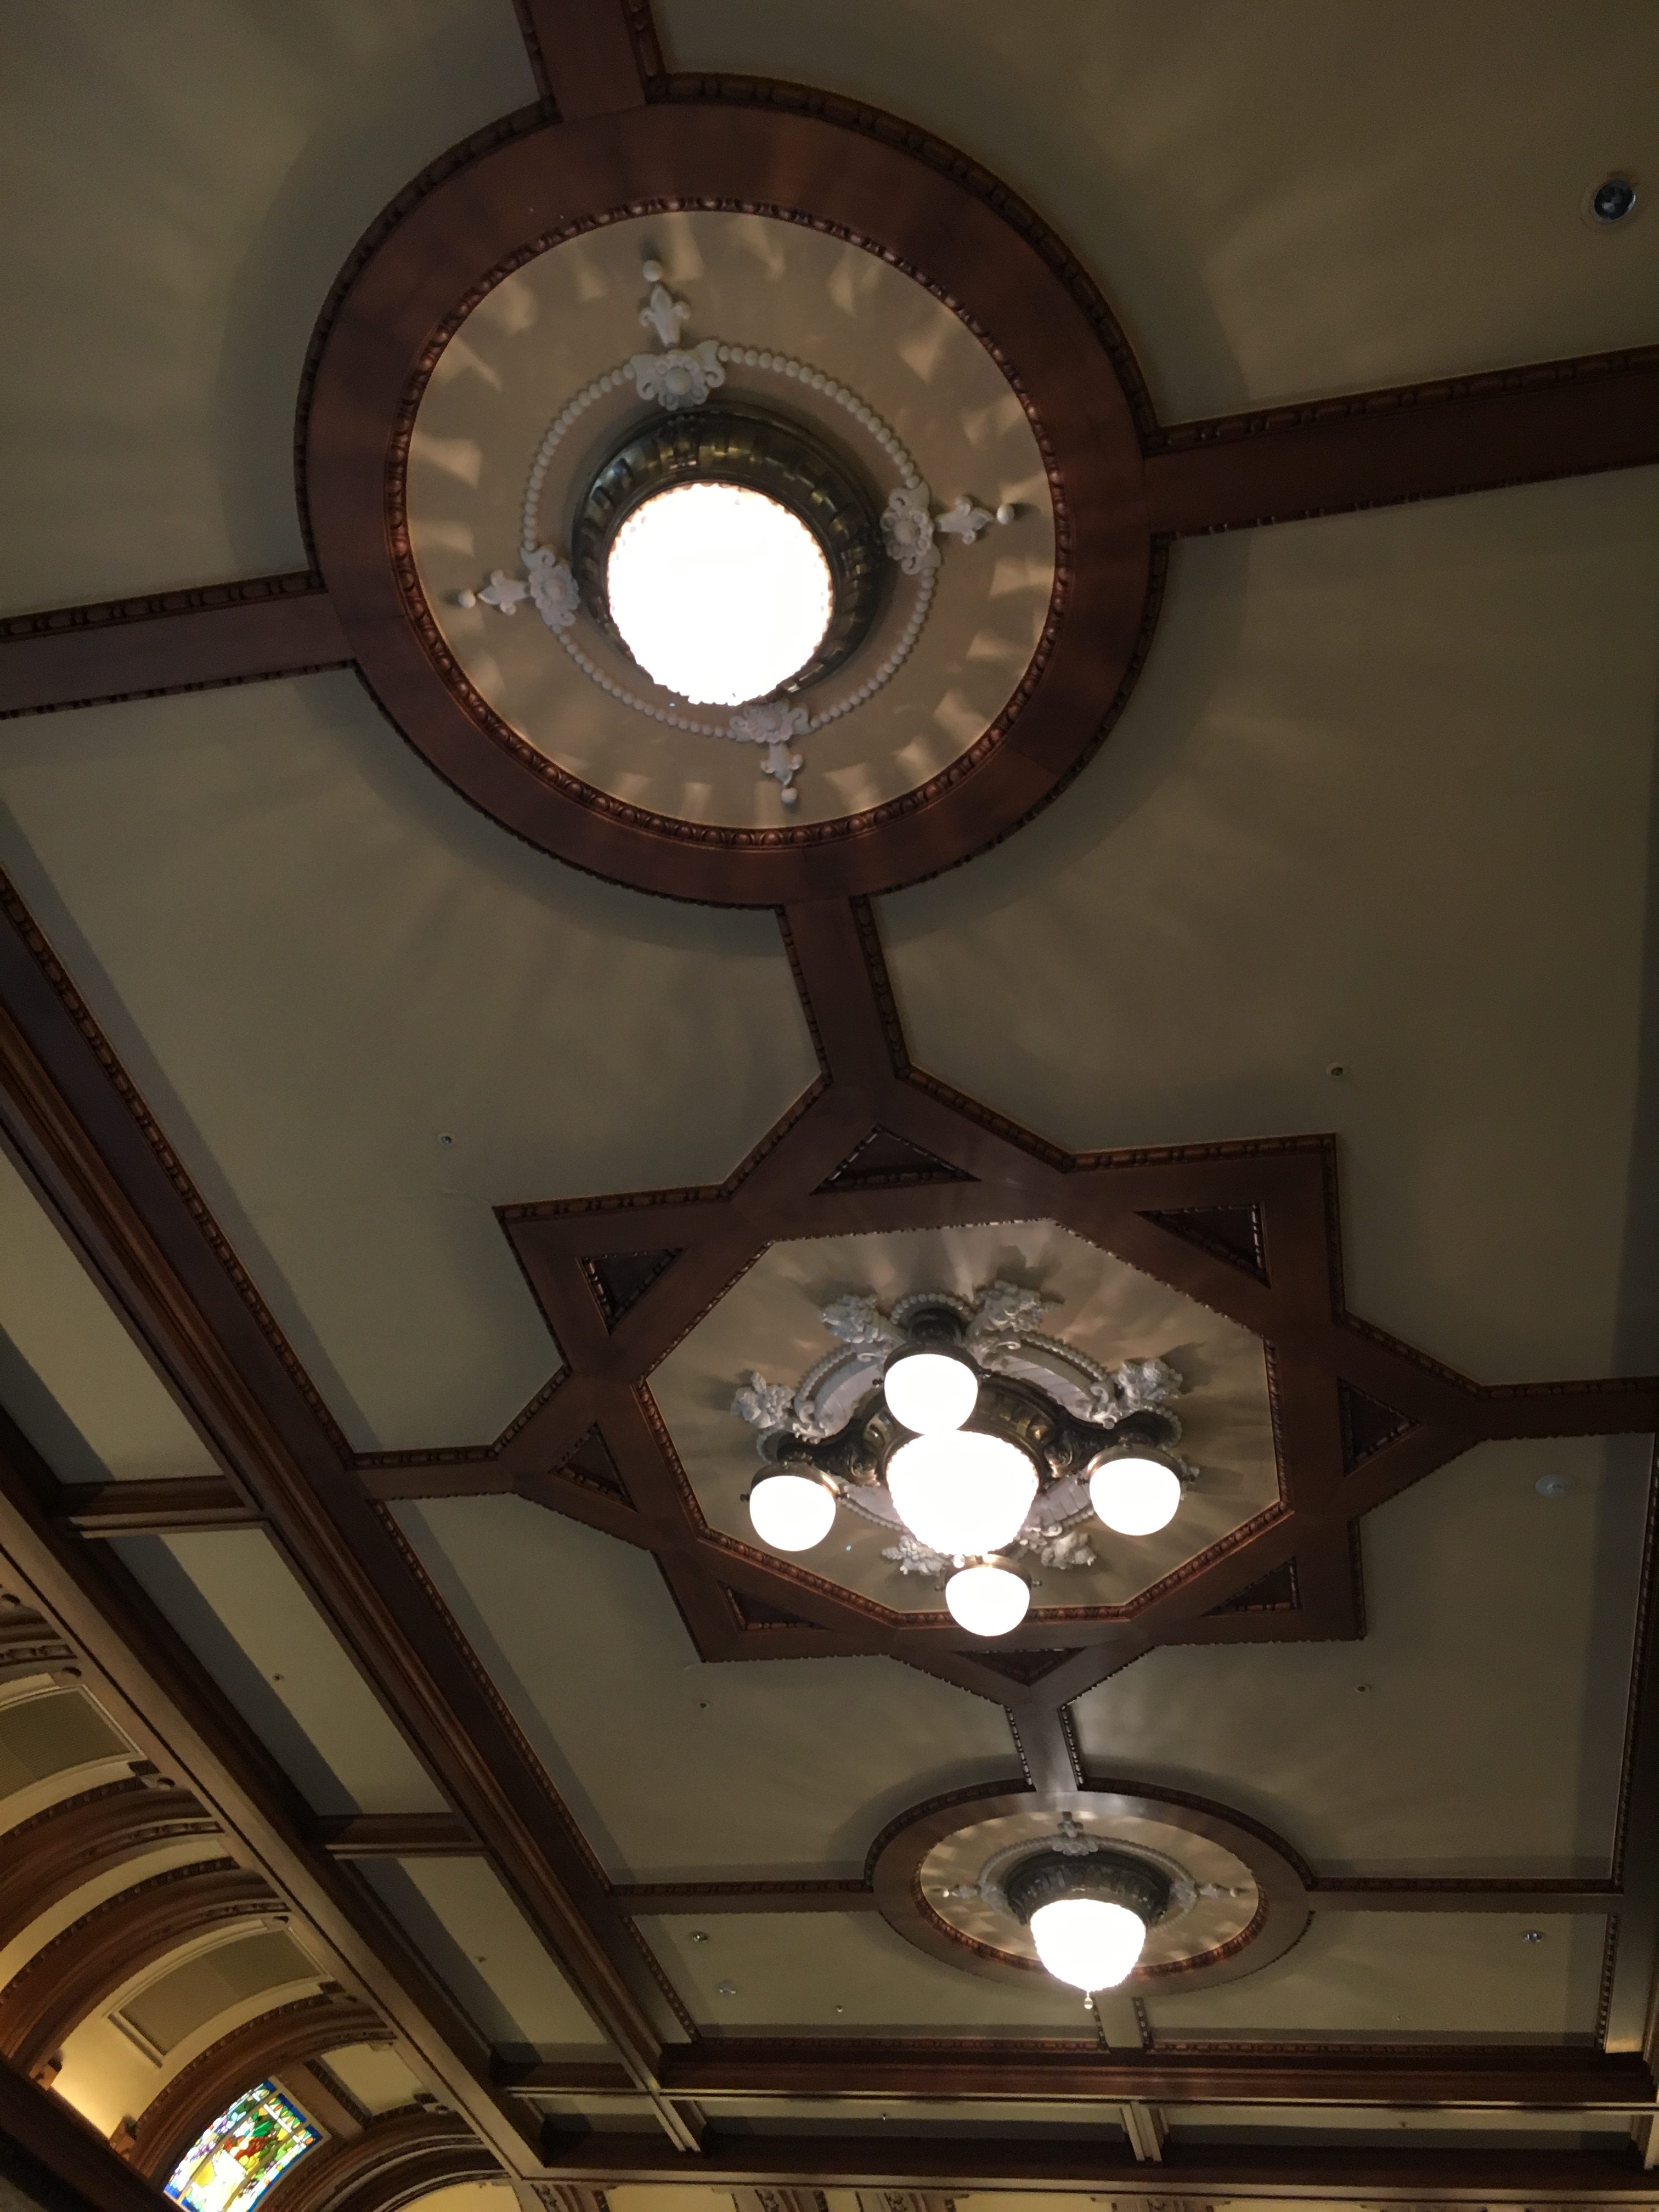 three crystal chandeliers surrounded by crown molding and wood details